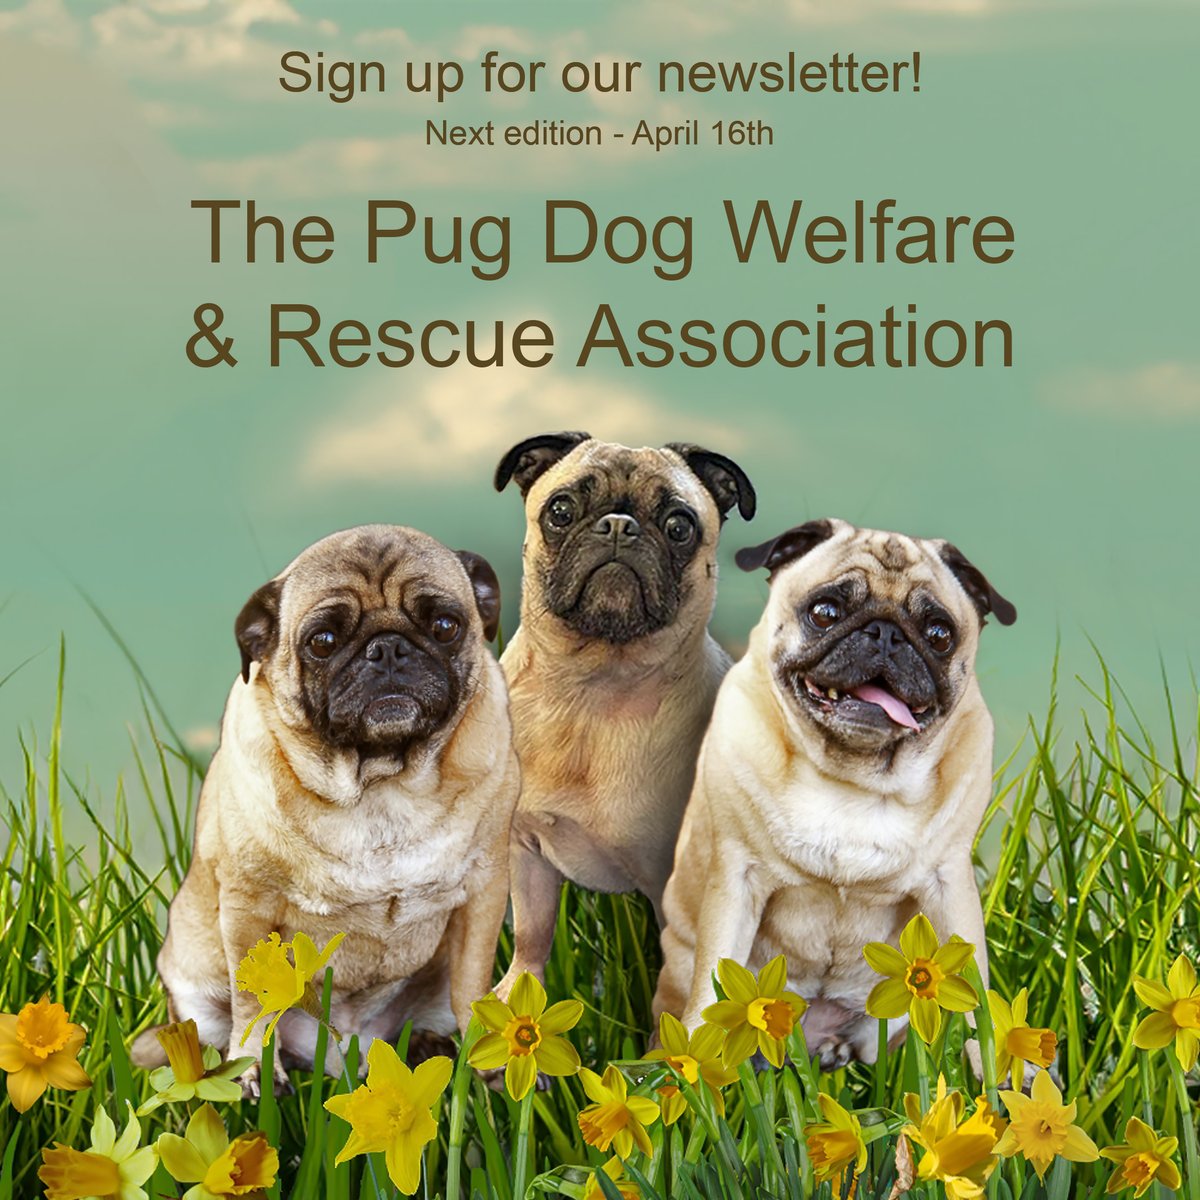 Our Spring newsletter goes out next week and it’s full of great adoption stories and useful info for pug owners. If you haven’t signed up already, just go to our website – ecs.page.link/ECcR8
#pdwra #pugcharity #pugwelfare #friendsofwelfare #foreverhome #pugadoption #pug